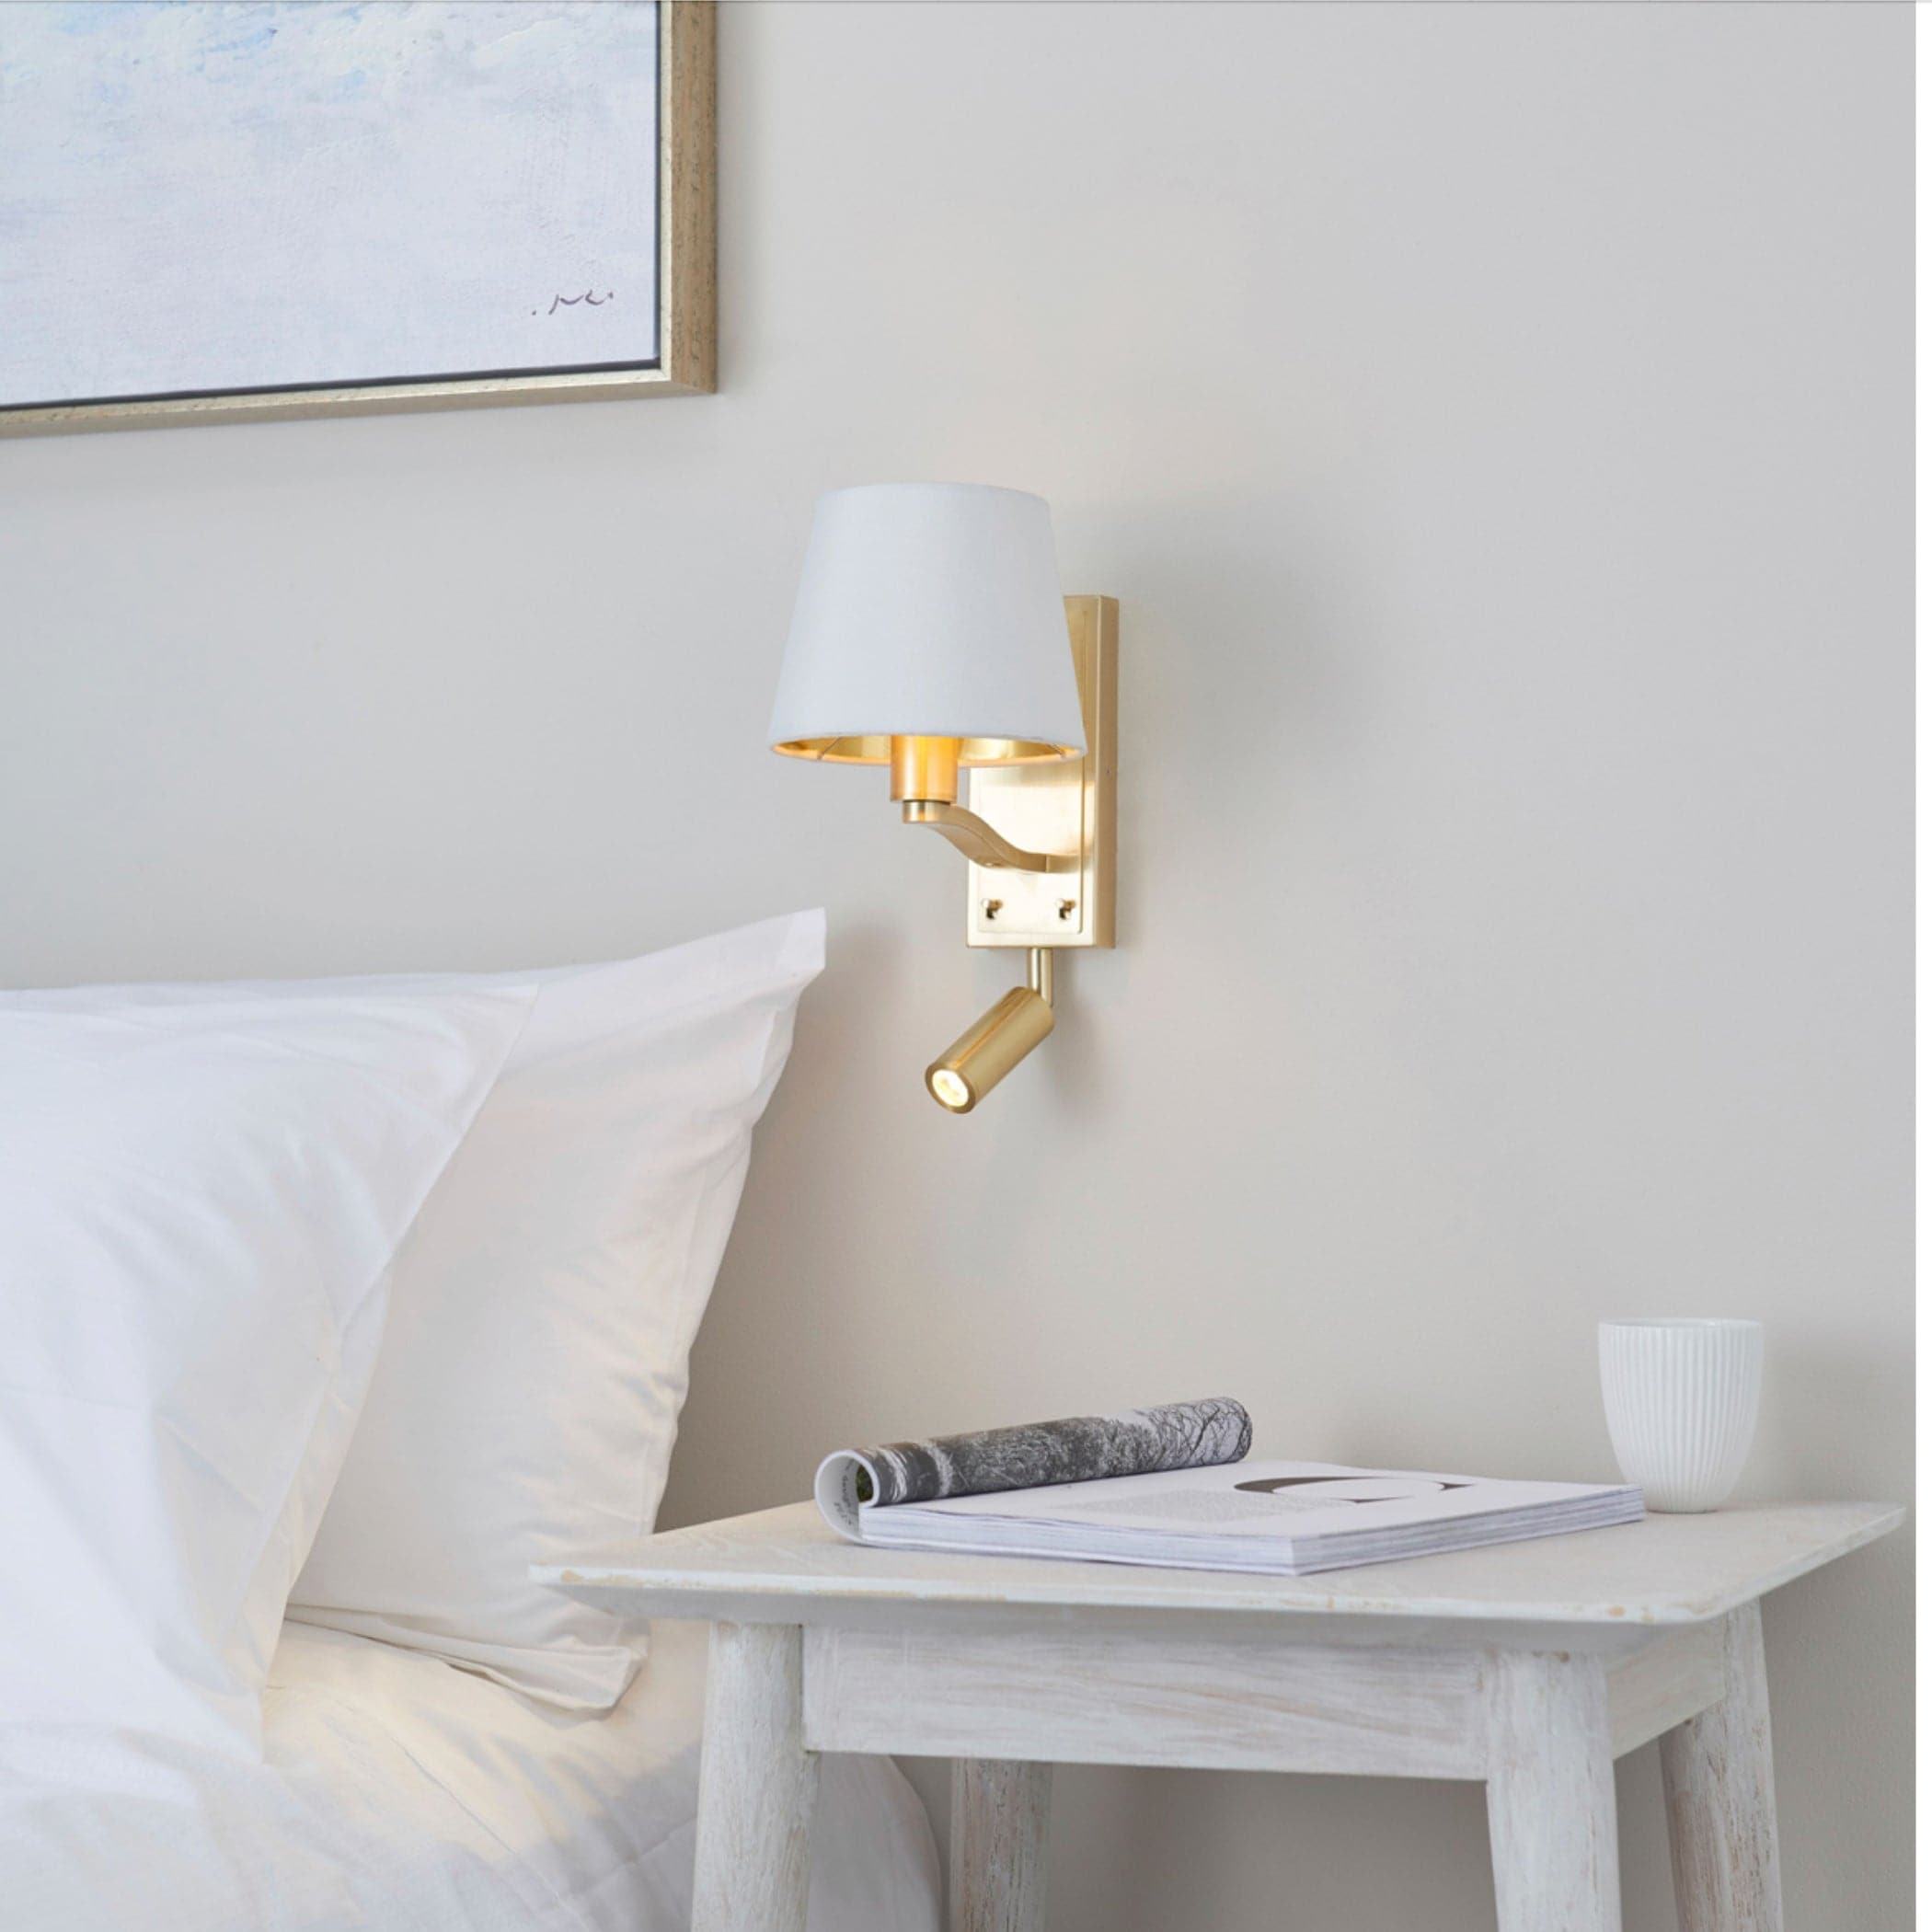 Brushed Satin Gold Wall Light with Shade & adjustable LED reading light